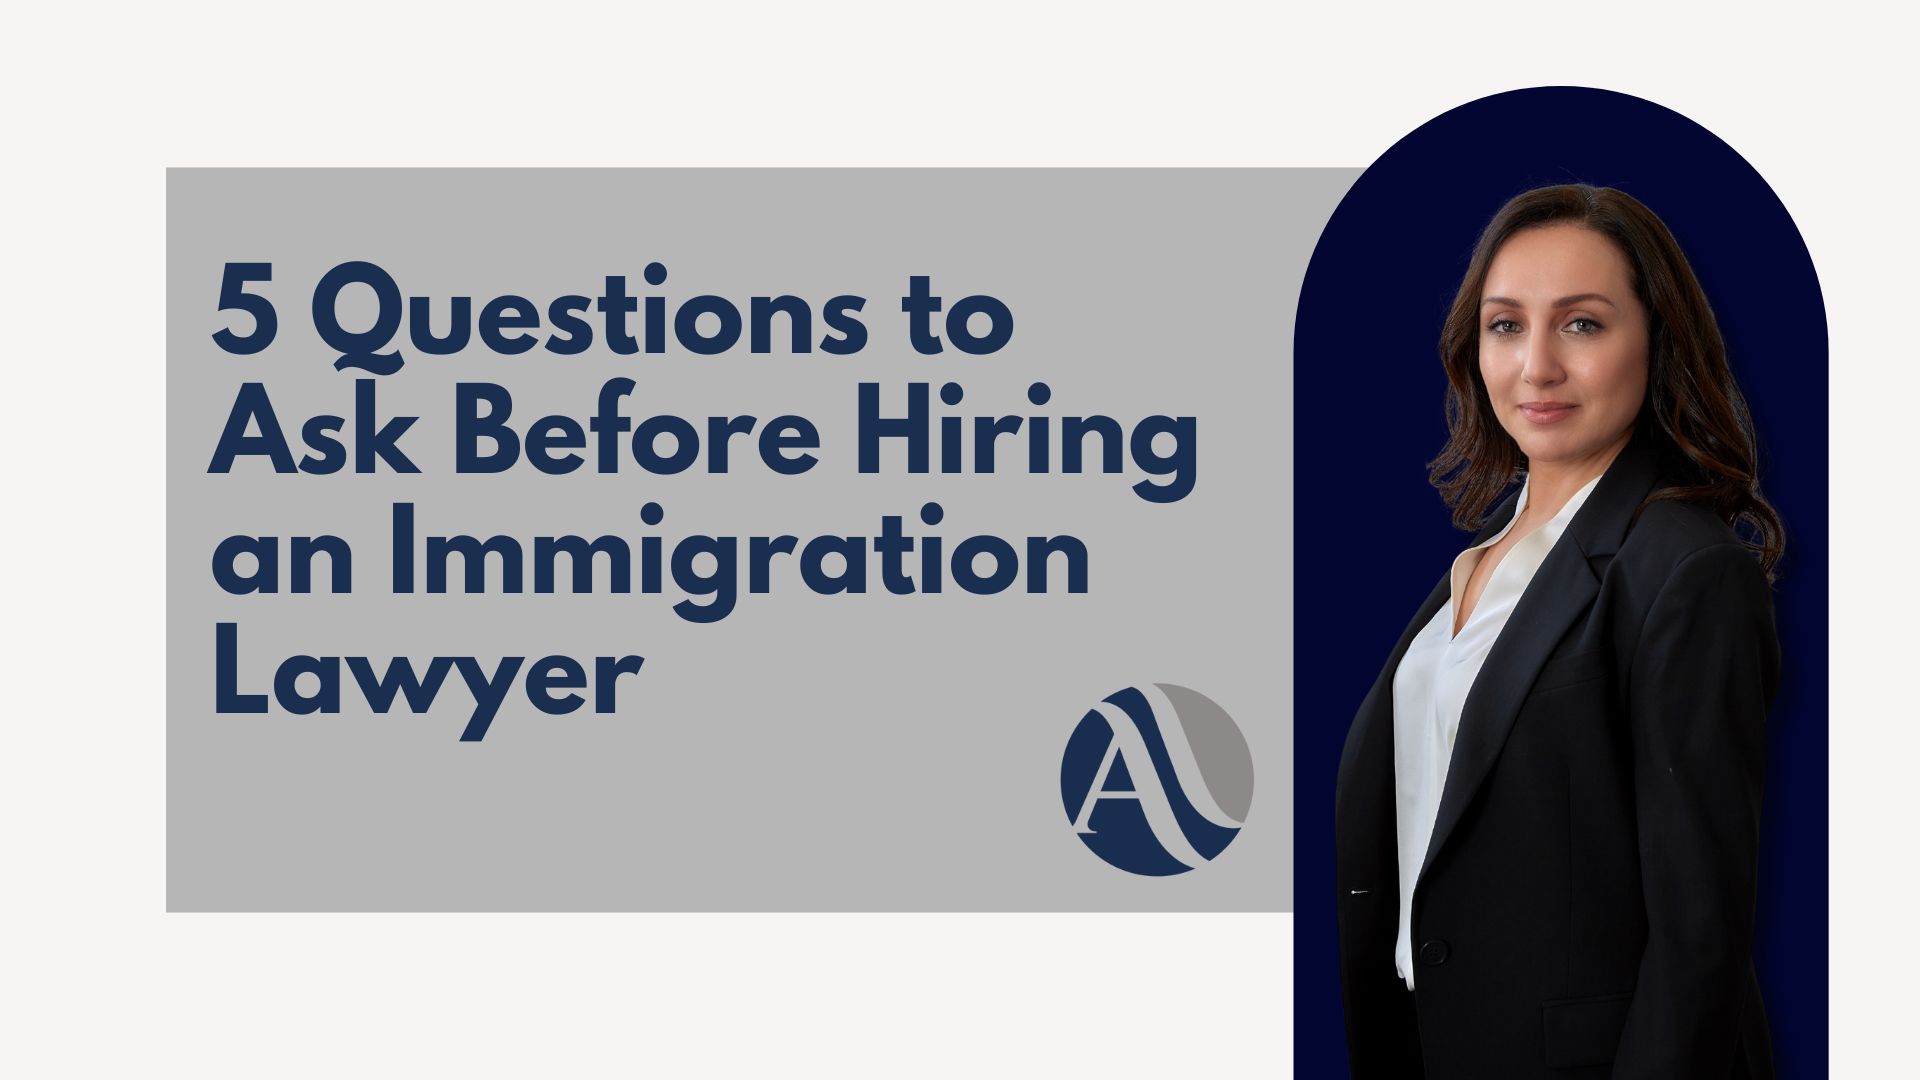 5 Questions to Ask Before Hiring an Immigration Lawyer